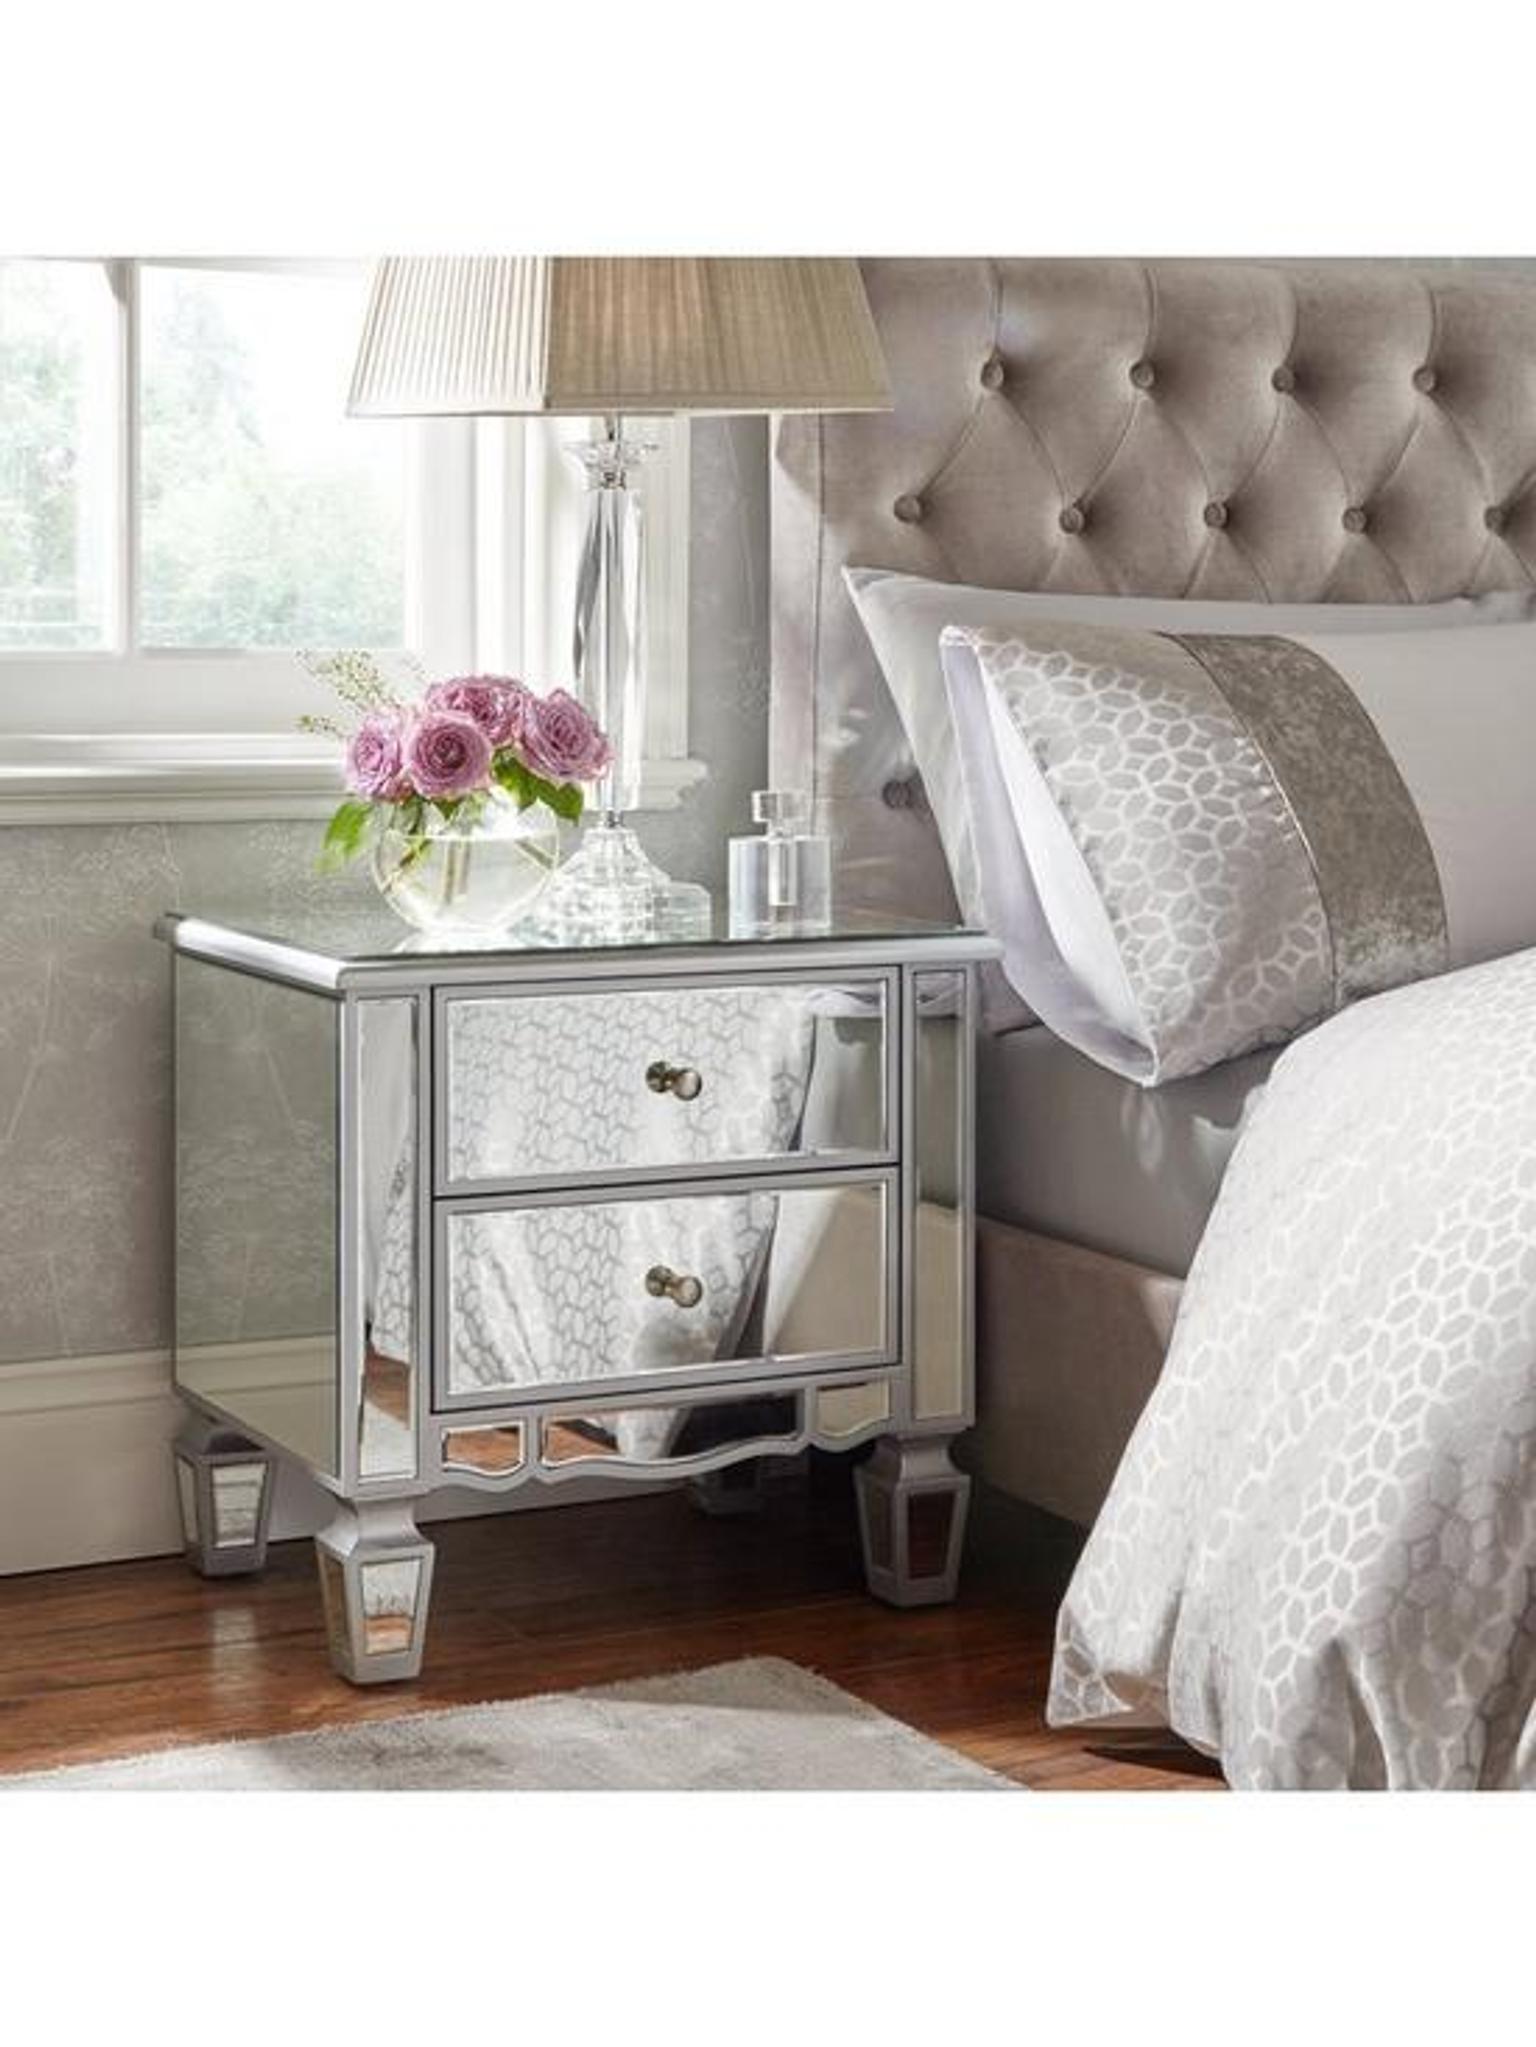 Mirrored Glass Bedside Cabinets In Ol1 Oldham For 89 99 For Sale